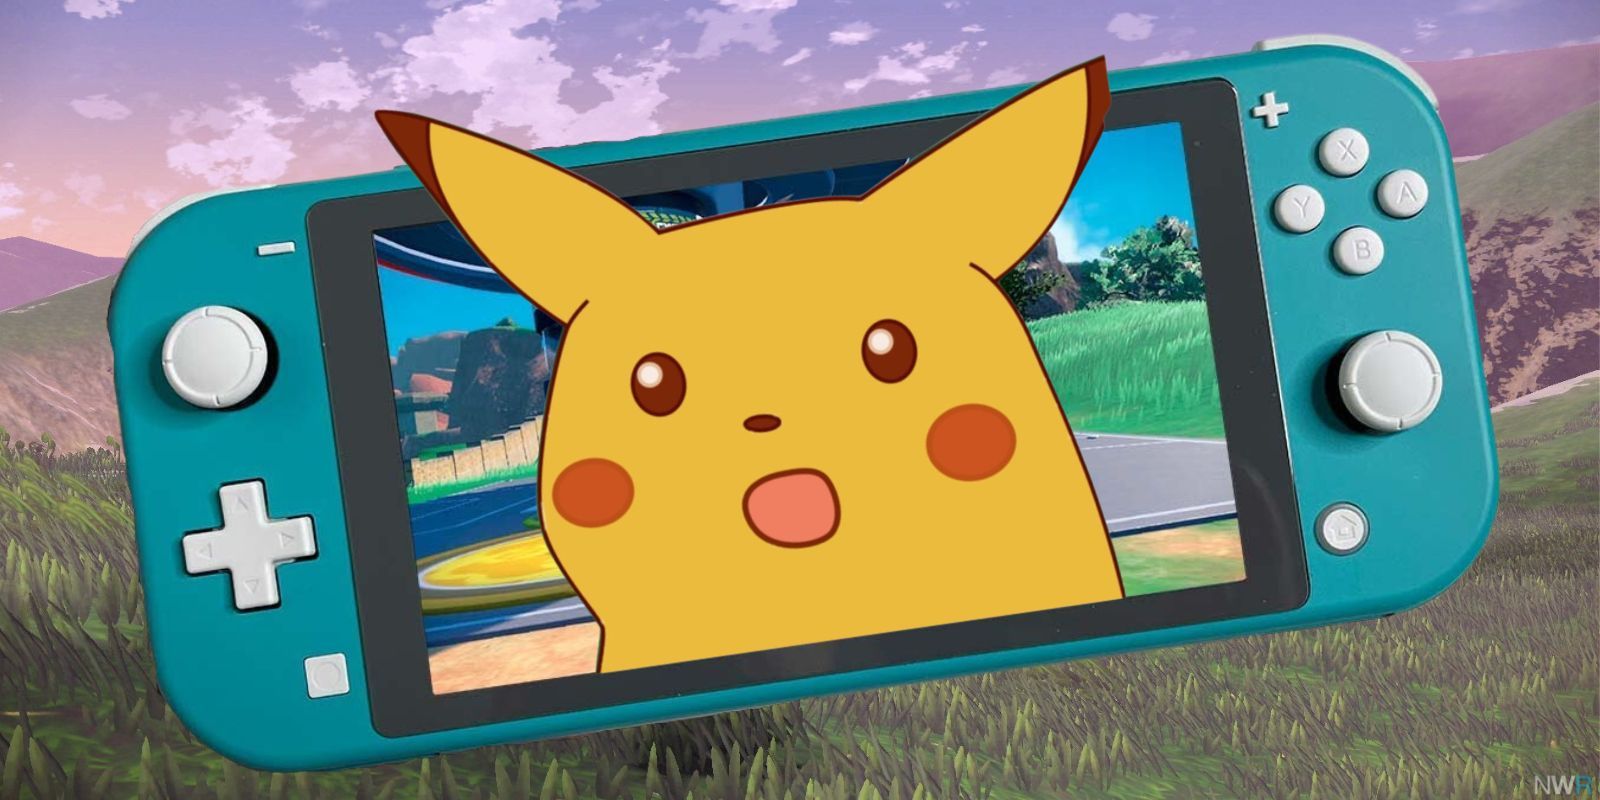 Surprised Pikachu popping out of a Nintendo Switch Lite in front of a Pokémon Legends: Arceus background.